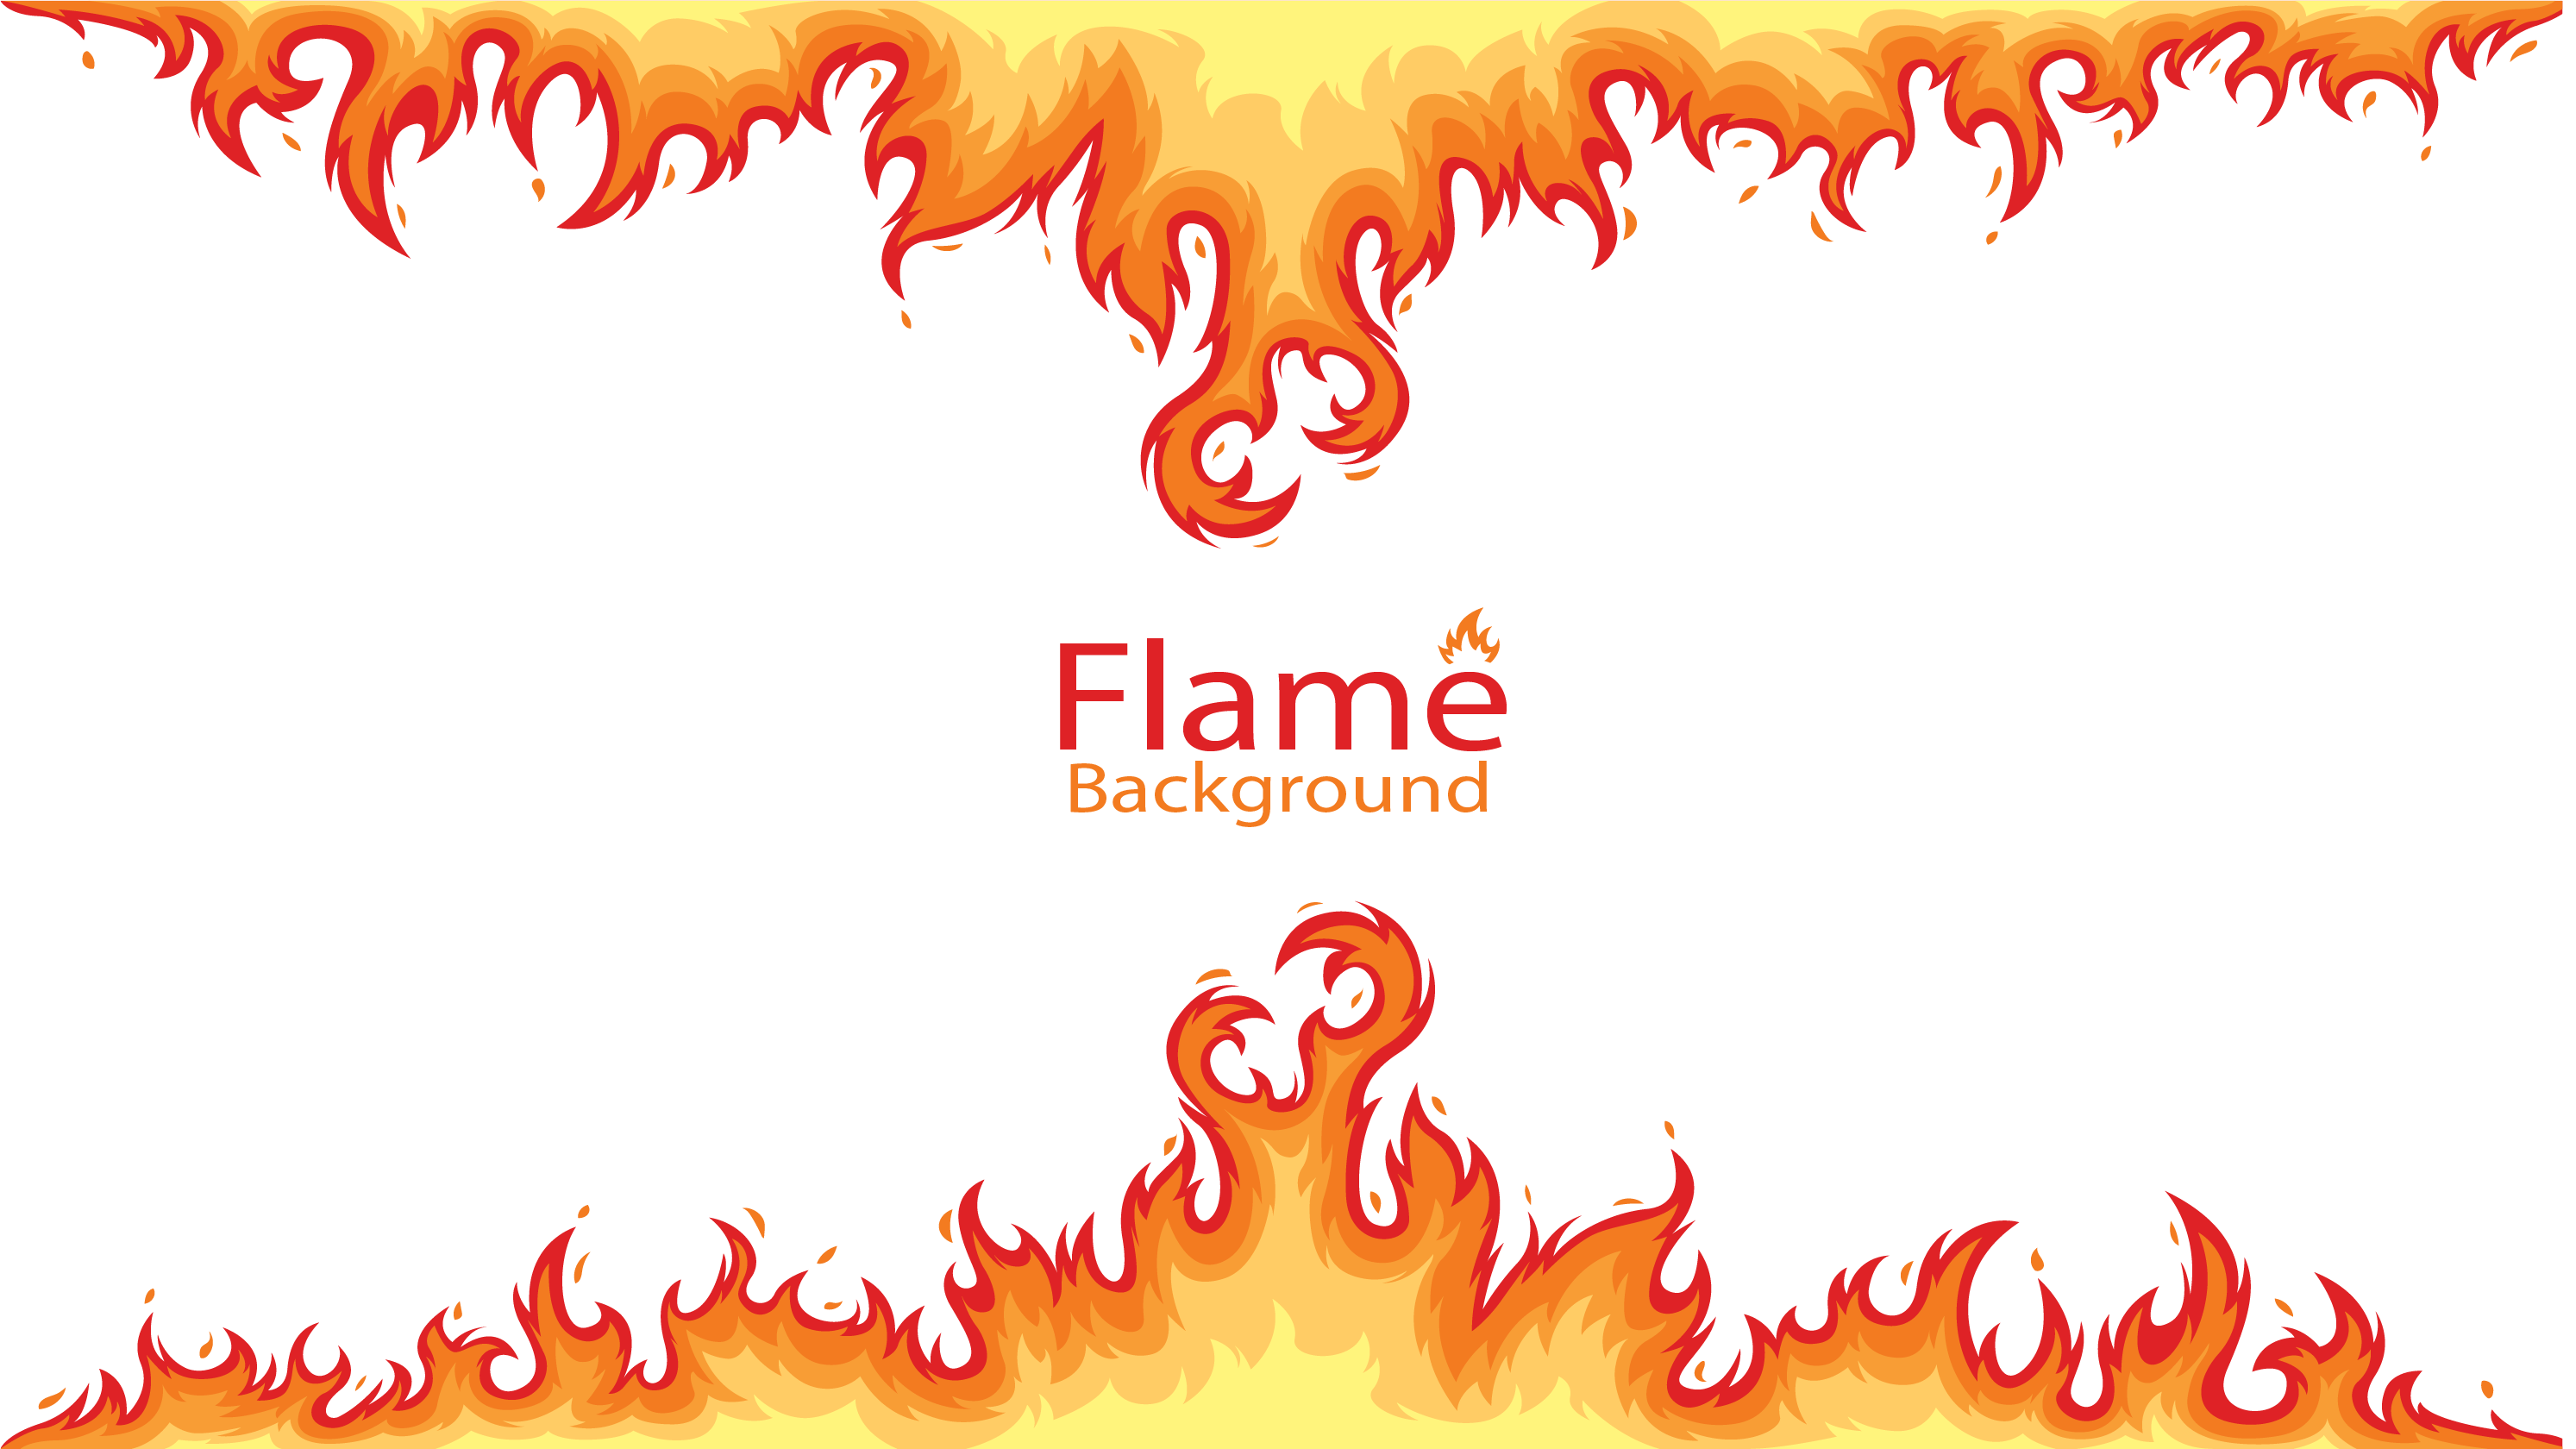 Flame Combustion Fire Euclidean vector - Burning flame borders png ...